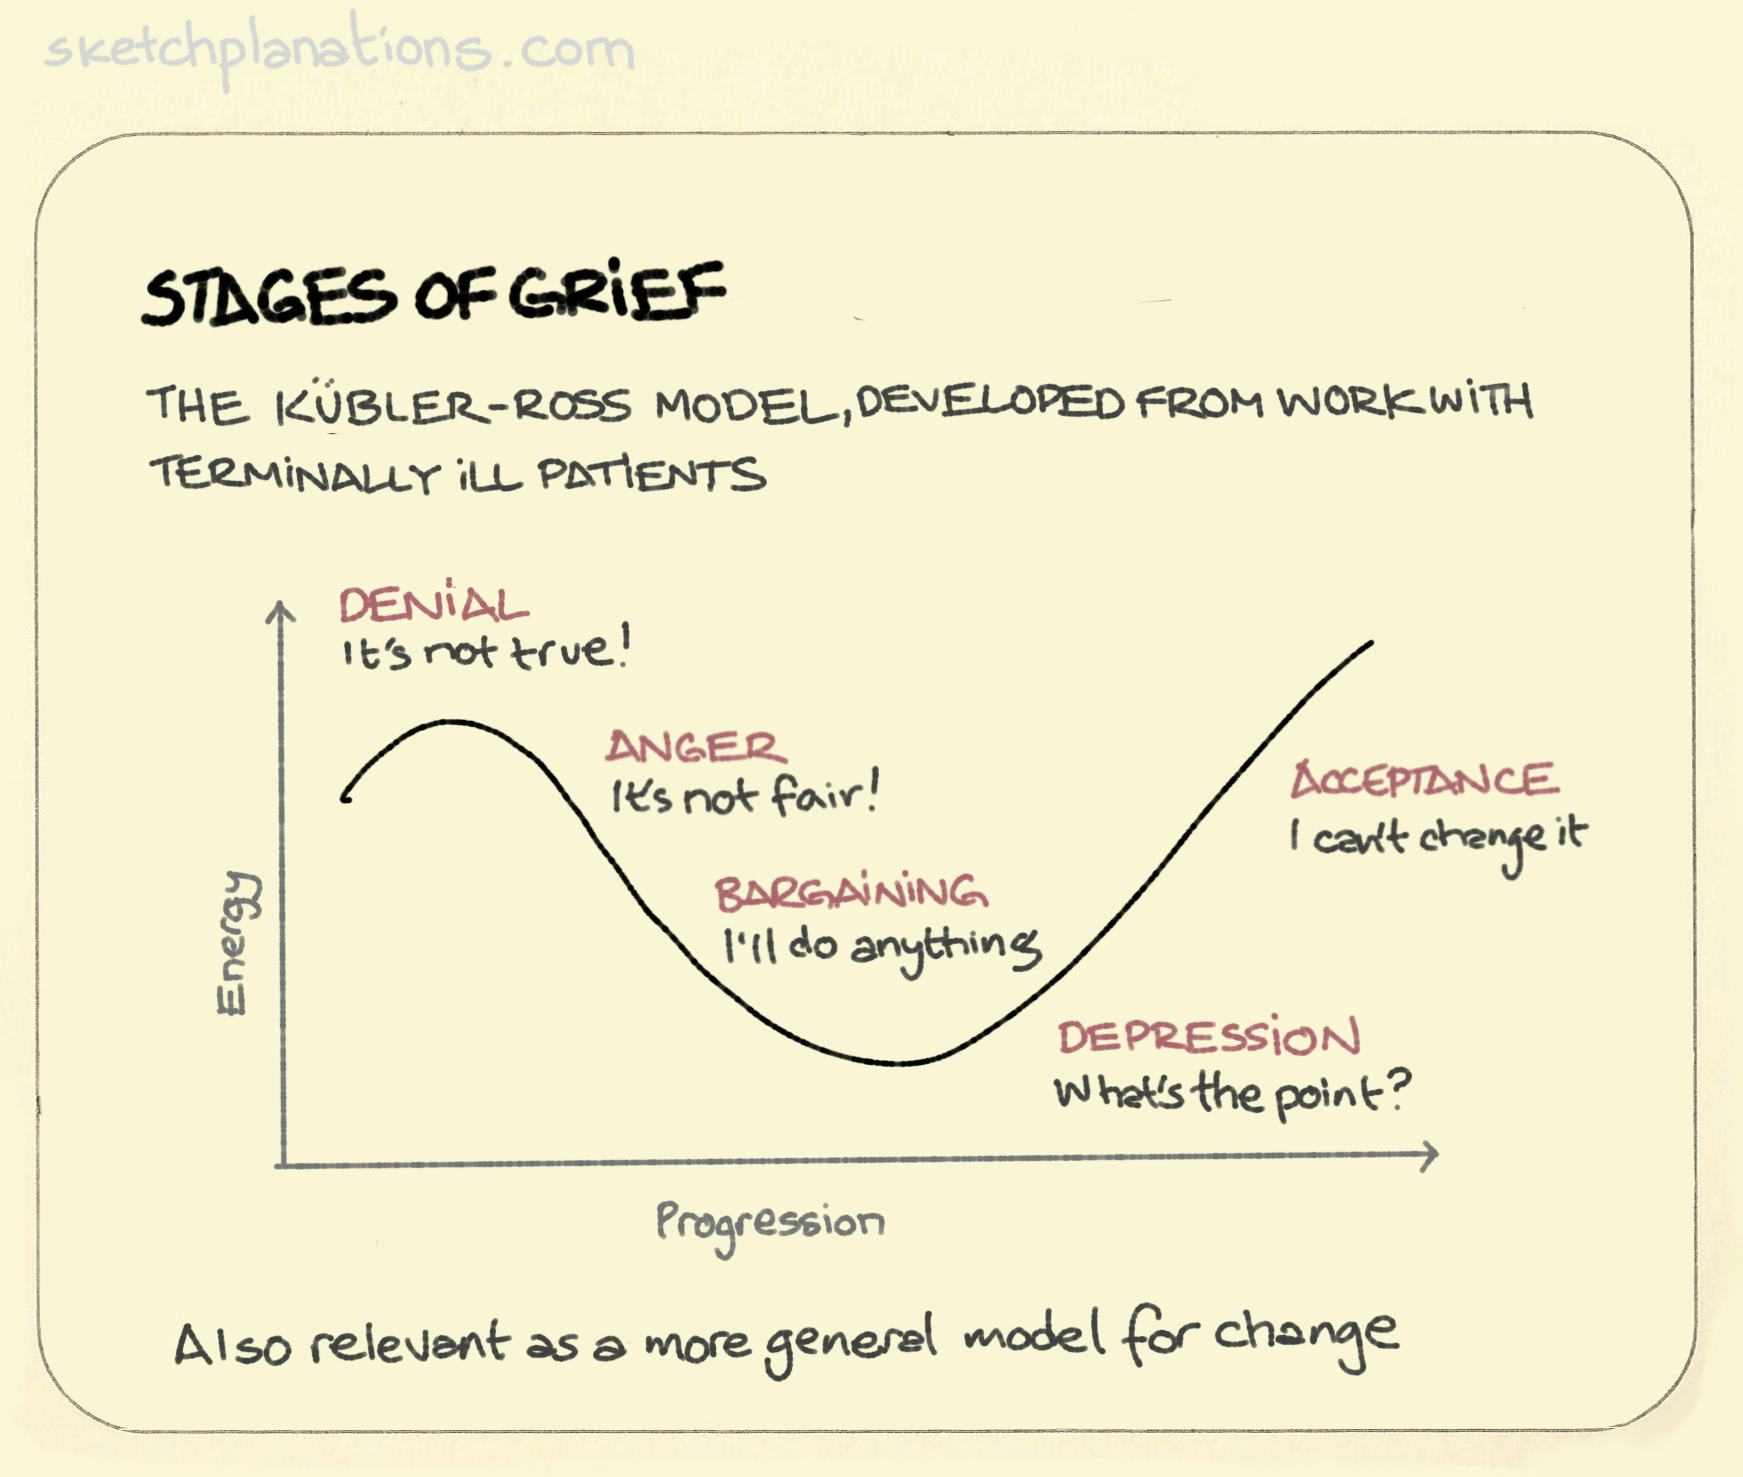 Stages of grief - Sketchplanations